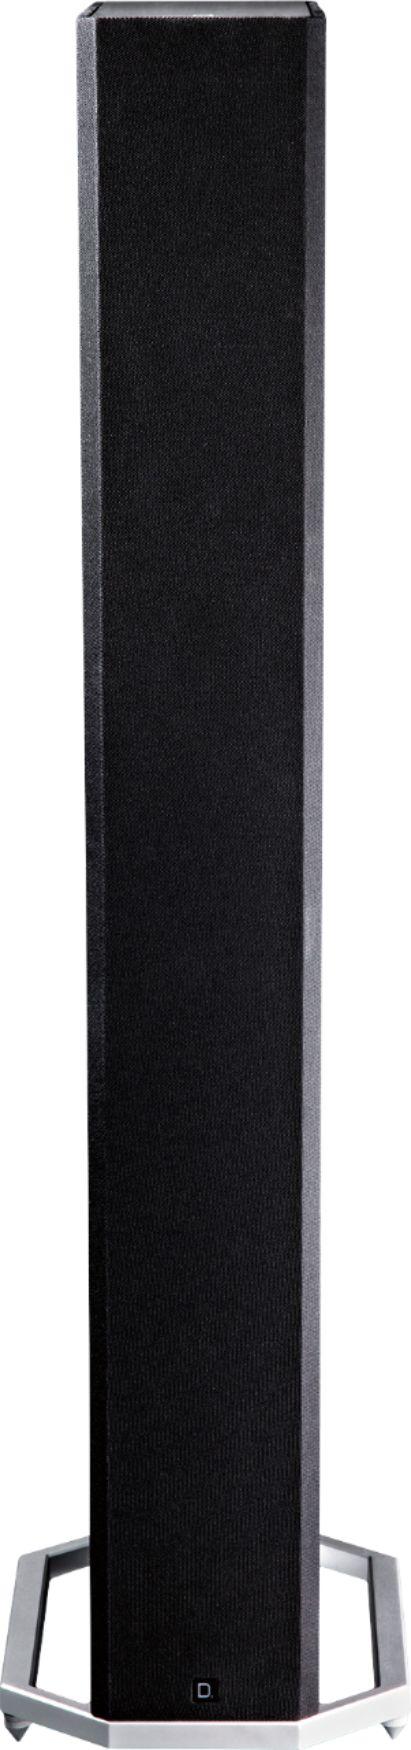 Definitive Technology - BP-9020 High Performance Home Theater Tower ...